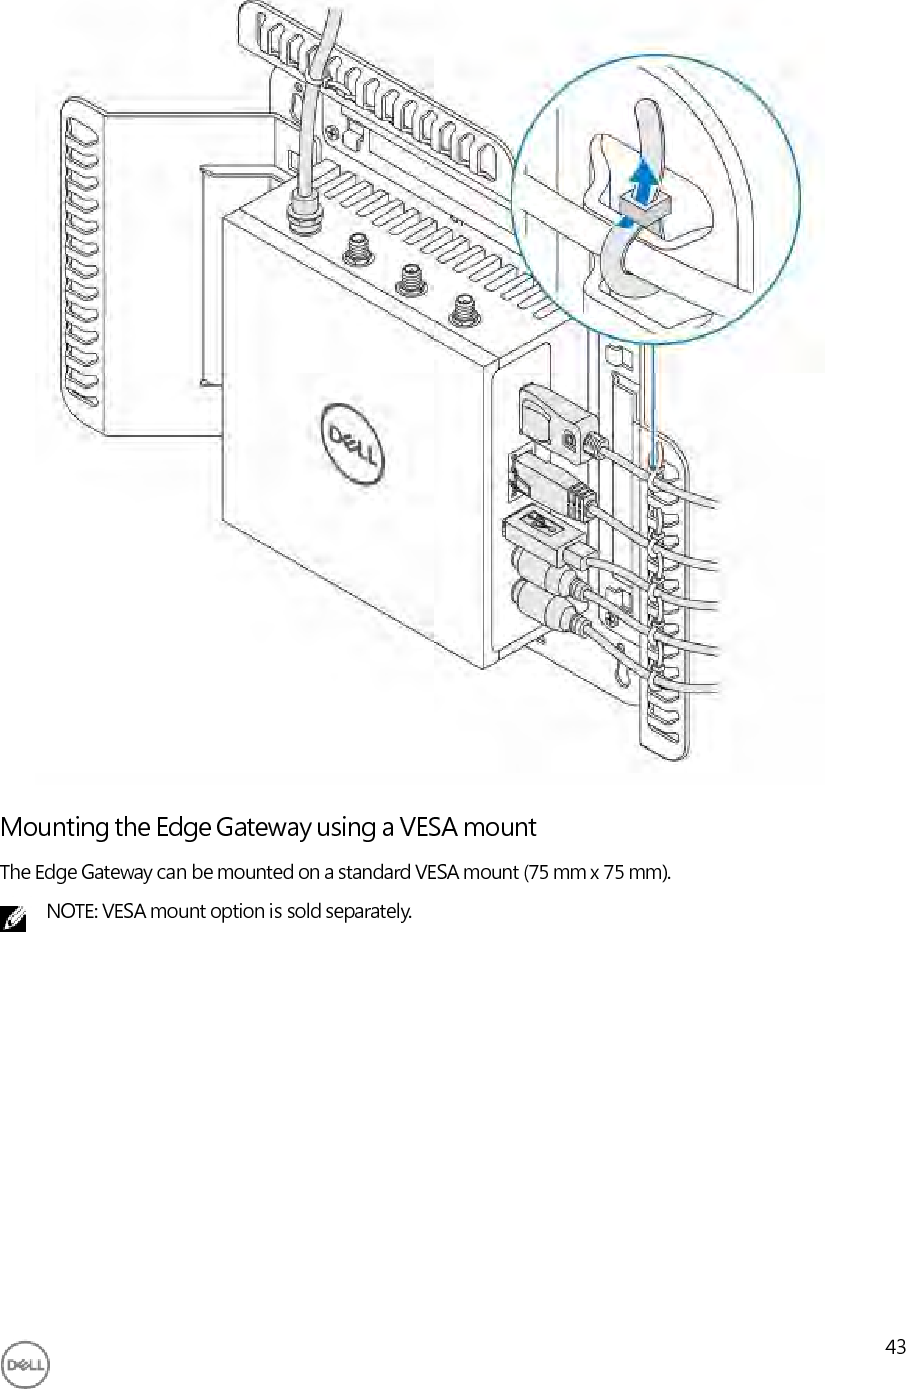                                       Mounting the Edge Gateway using a VESA mount The Edge Gateway can be mounted on a standard VESA mount (75 mm x 75 mm). NOTE: VESA mount option is sold separately.                 43